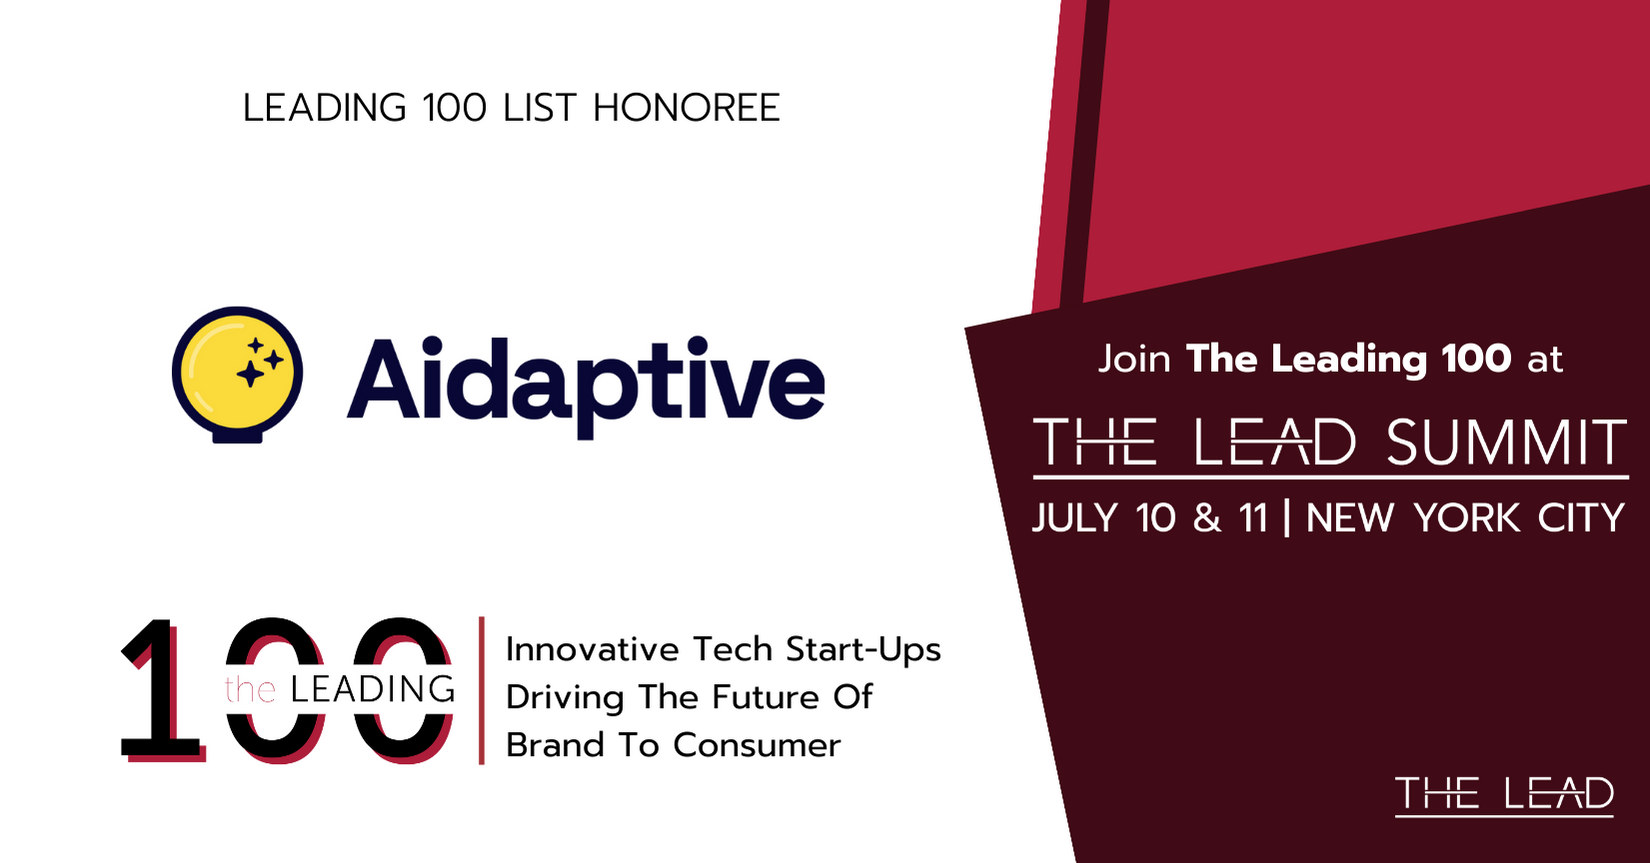 Aidaptive Recognized as a Leading Innovator in eCommerce with Leading 100 Award